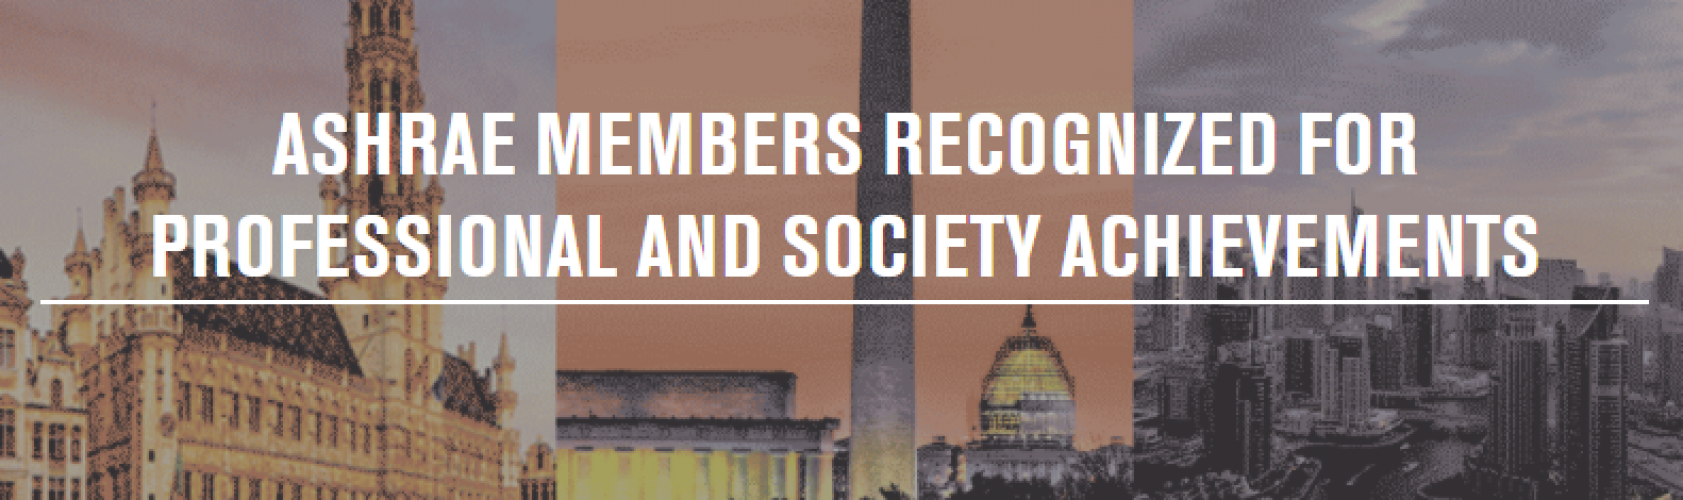 ASHRAE Members Recognized for Professional and Society Achievements